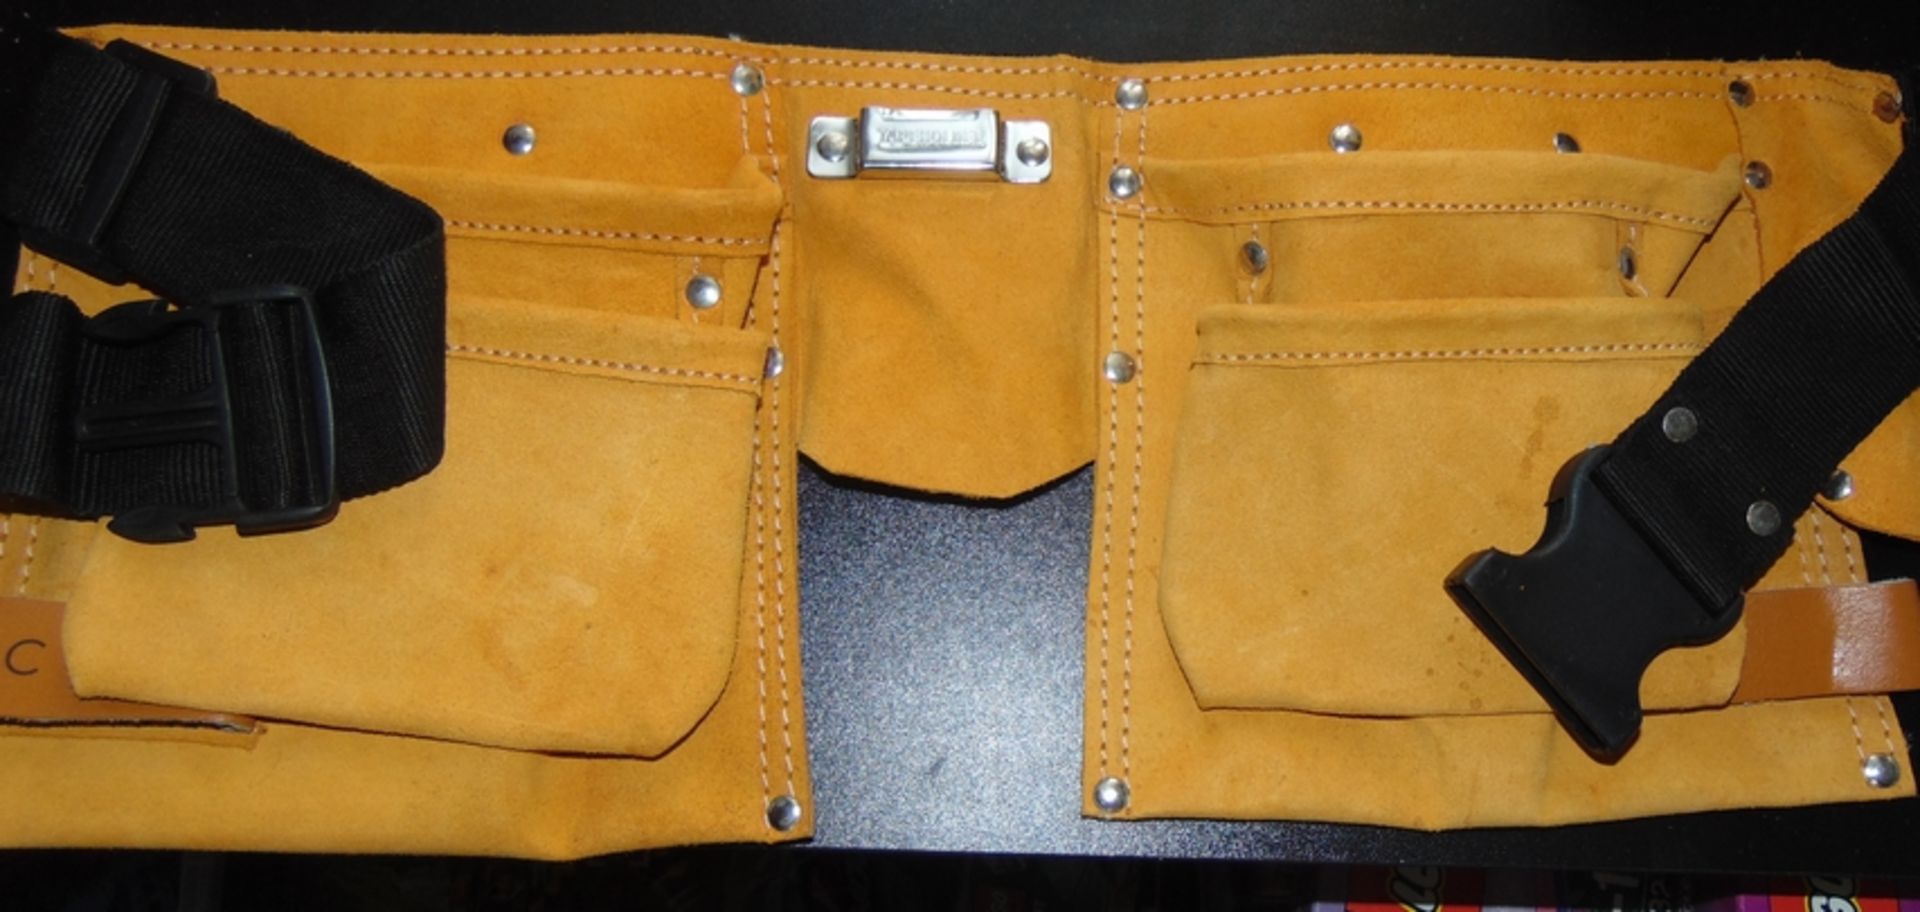 Area J6. A Top Quality 14 Pocket Leather Tool Belt, Looks New